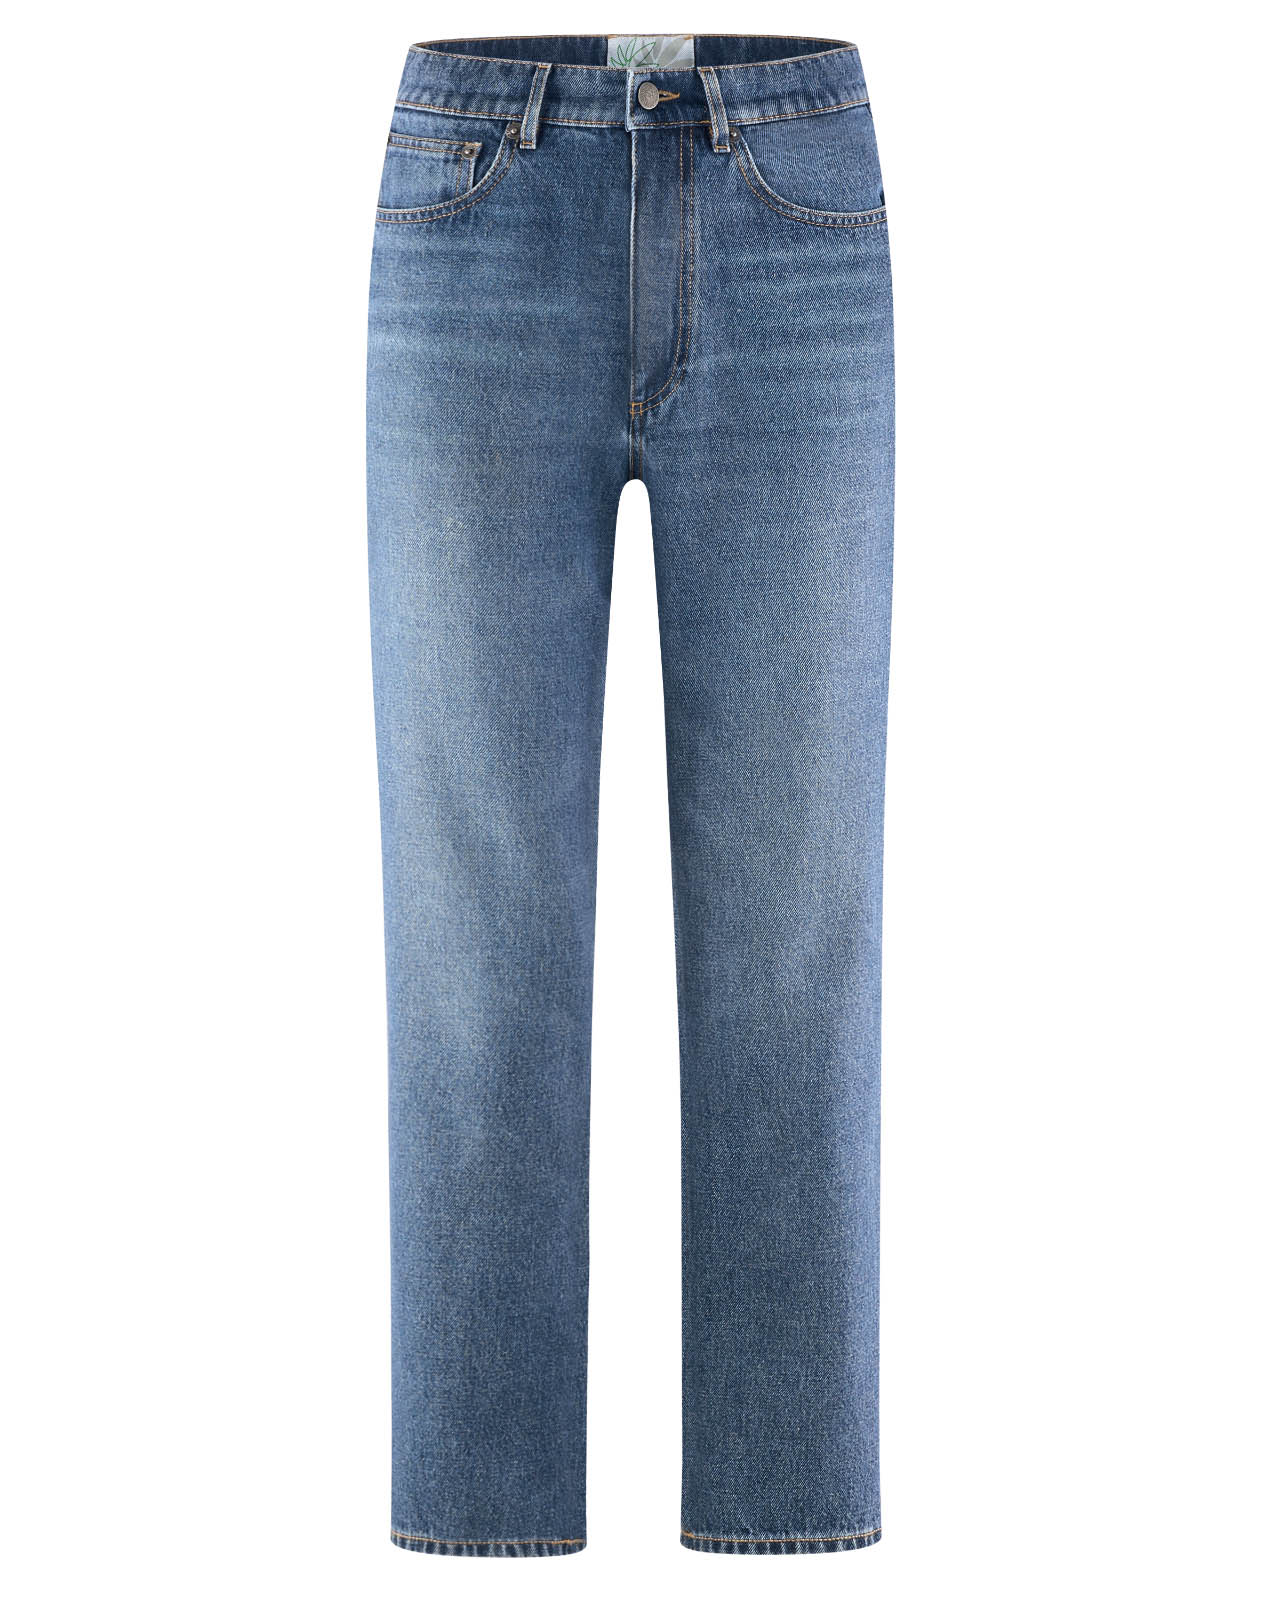 BN550 Highrise Jeans